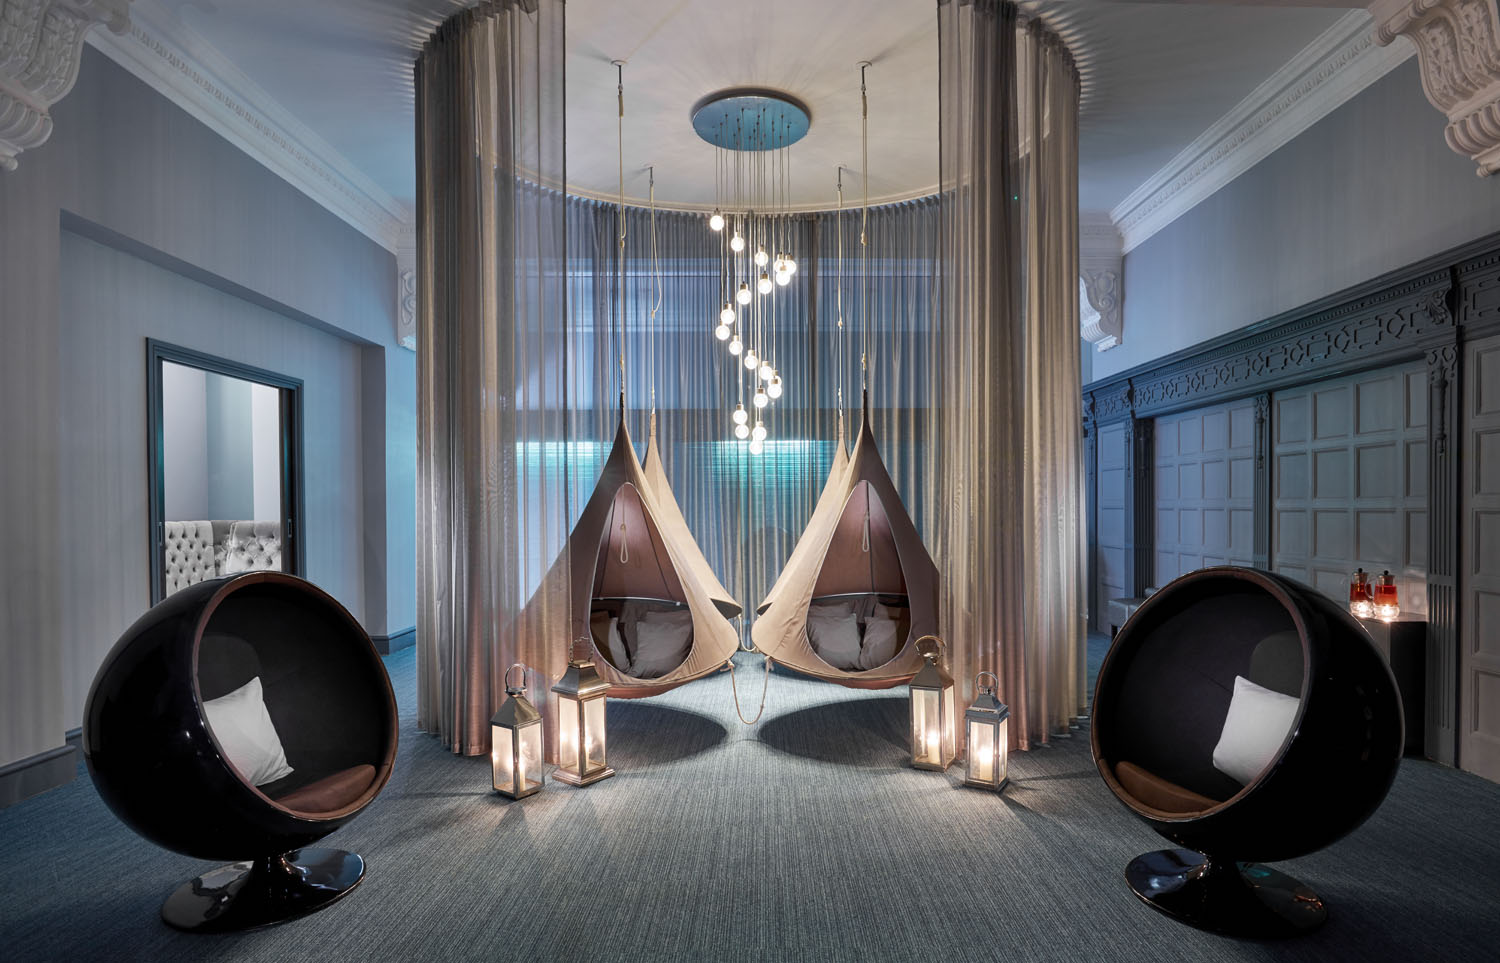 A Review of the Rena Spa at the Midland Manchester